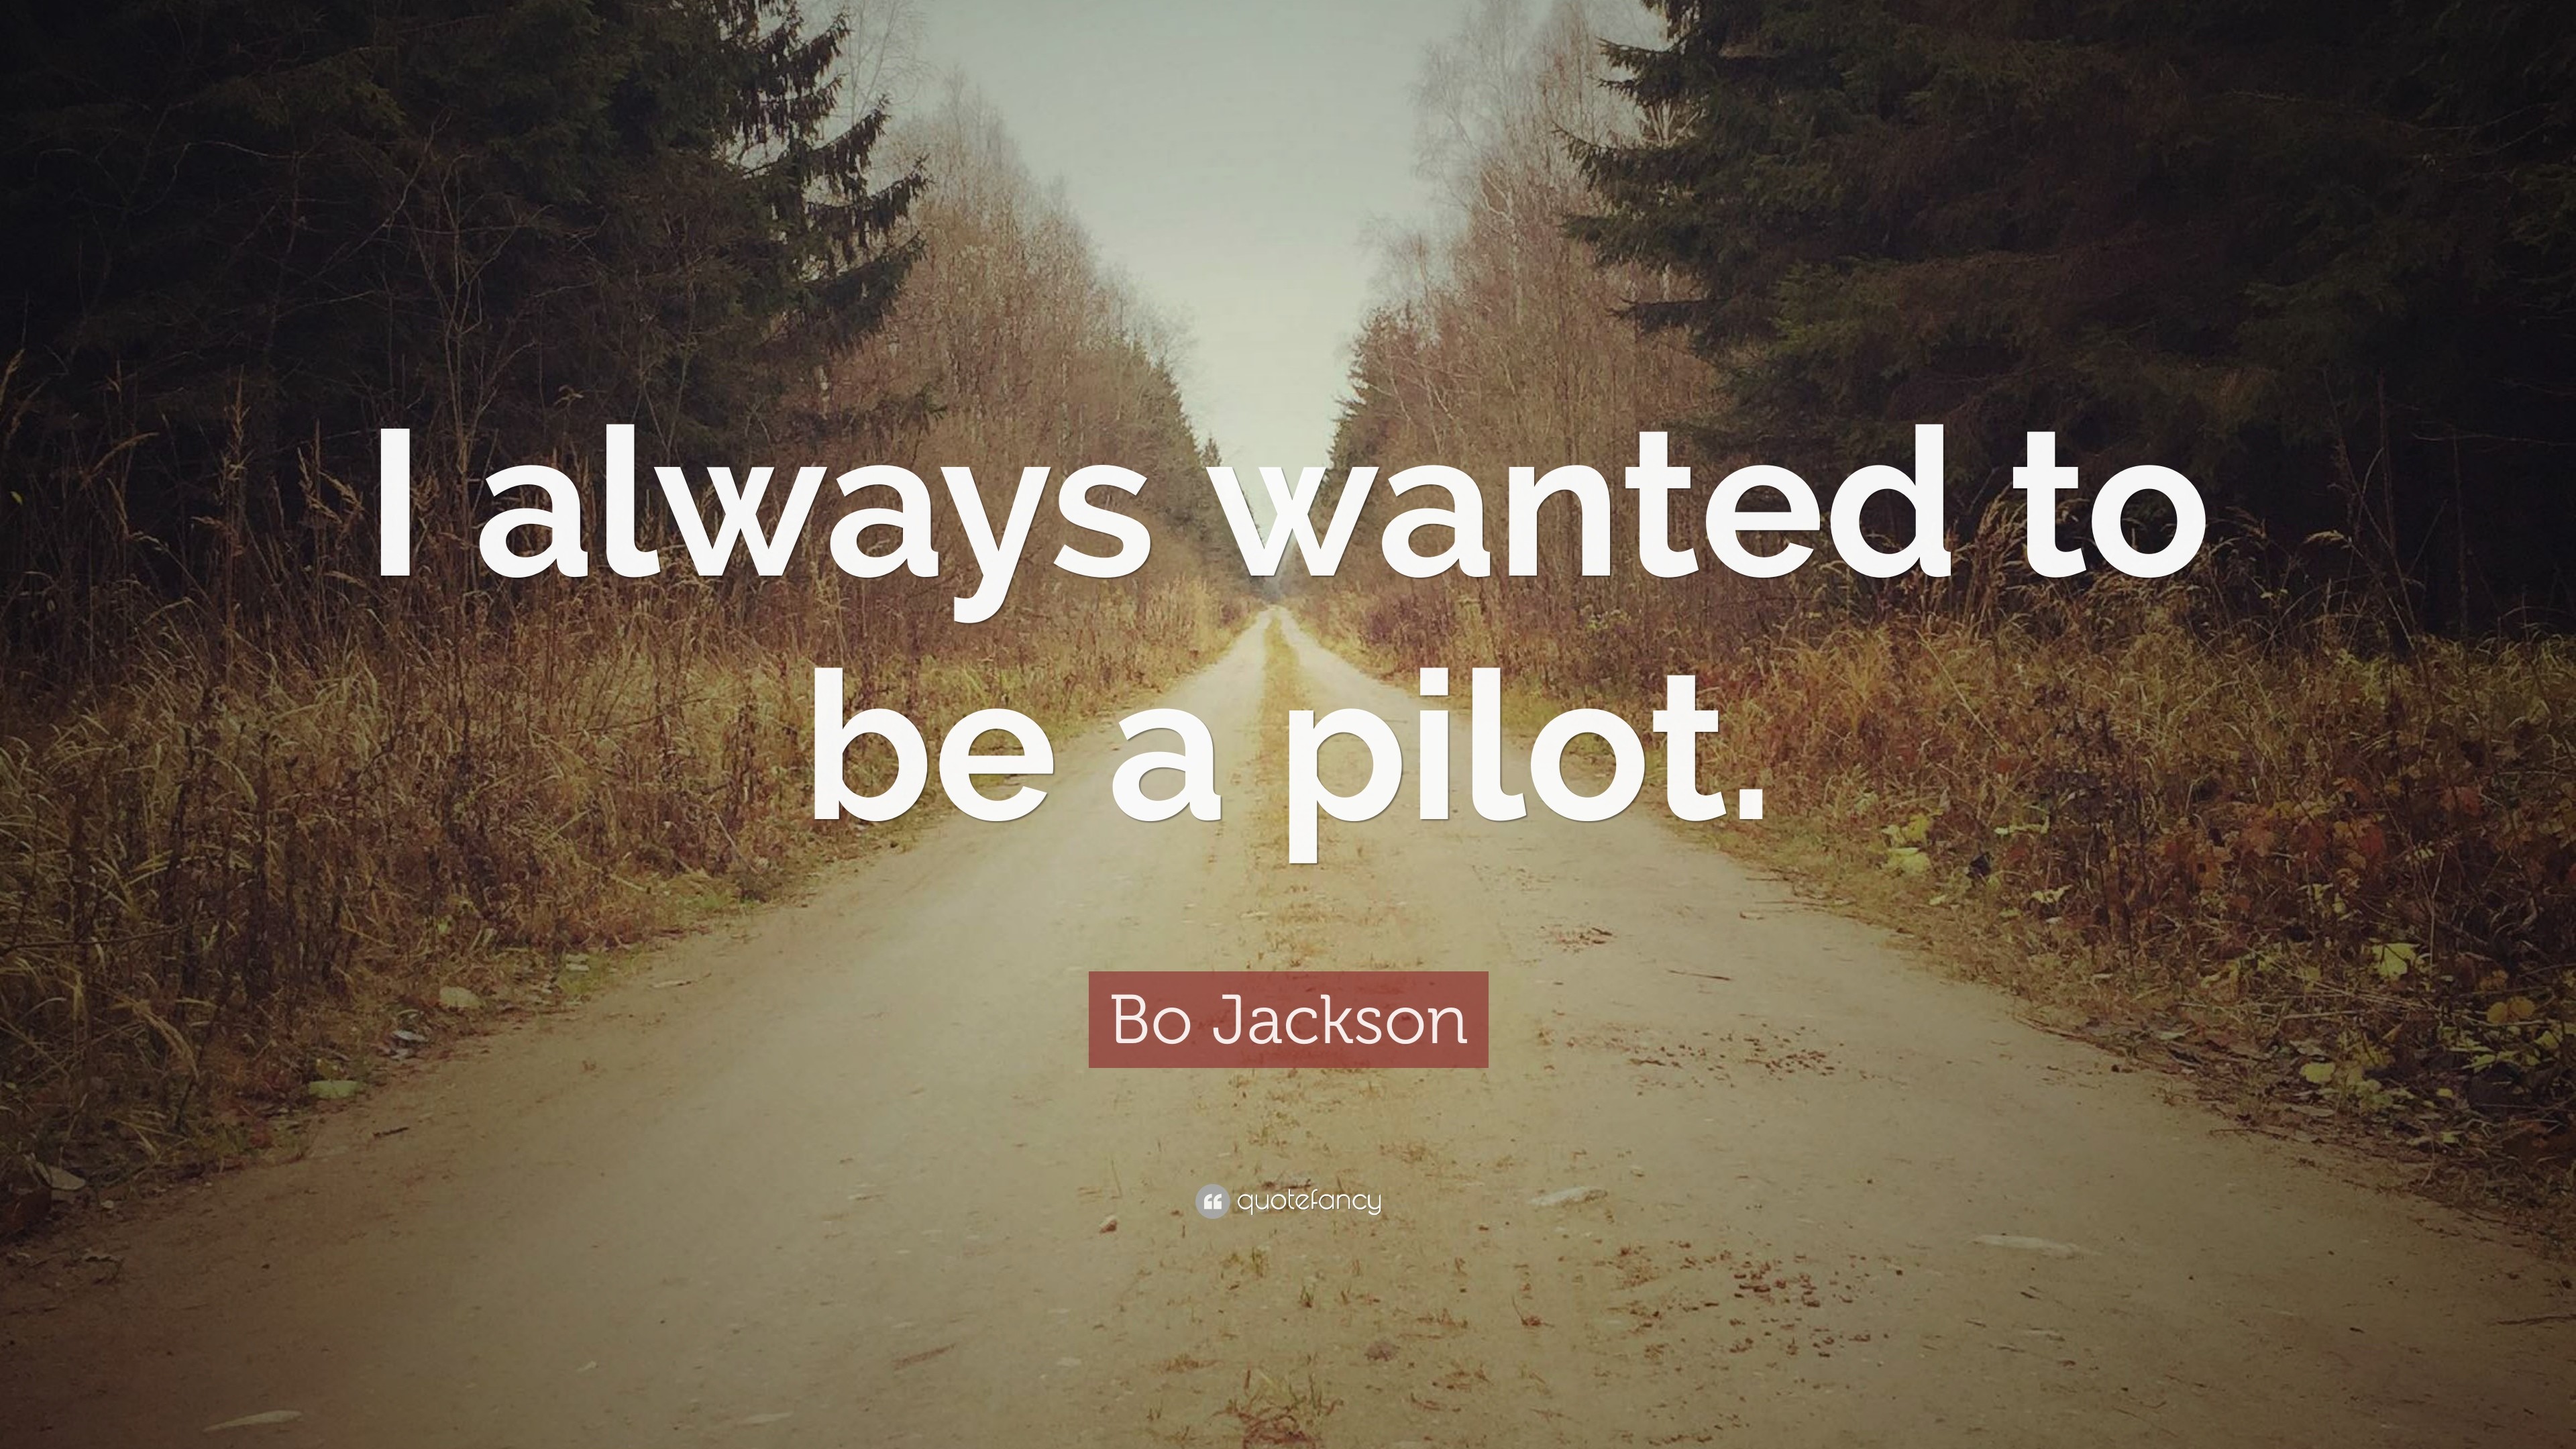 Bo Jackson Quote: “I always wanted to be a pilot.”